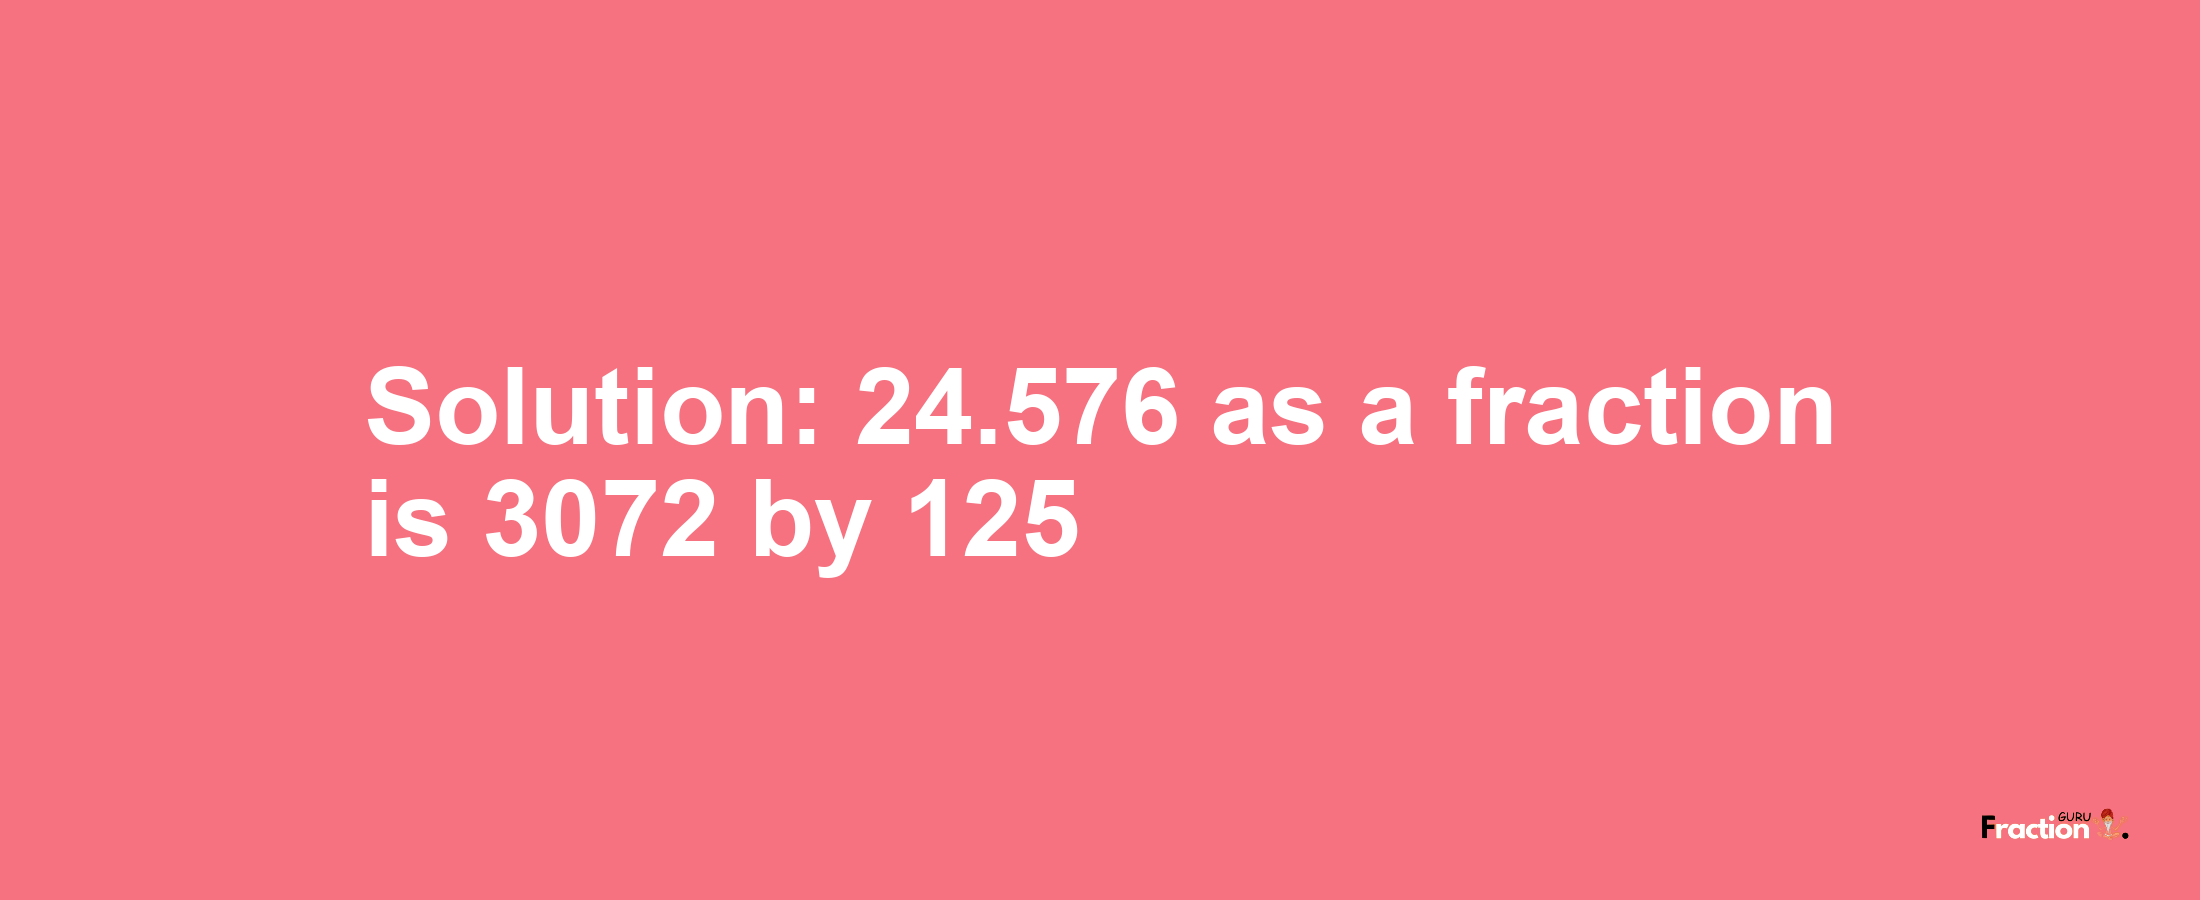 Solution:24.576 as a fraction is 3072/125